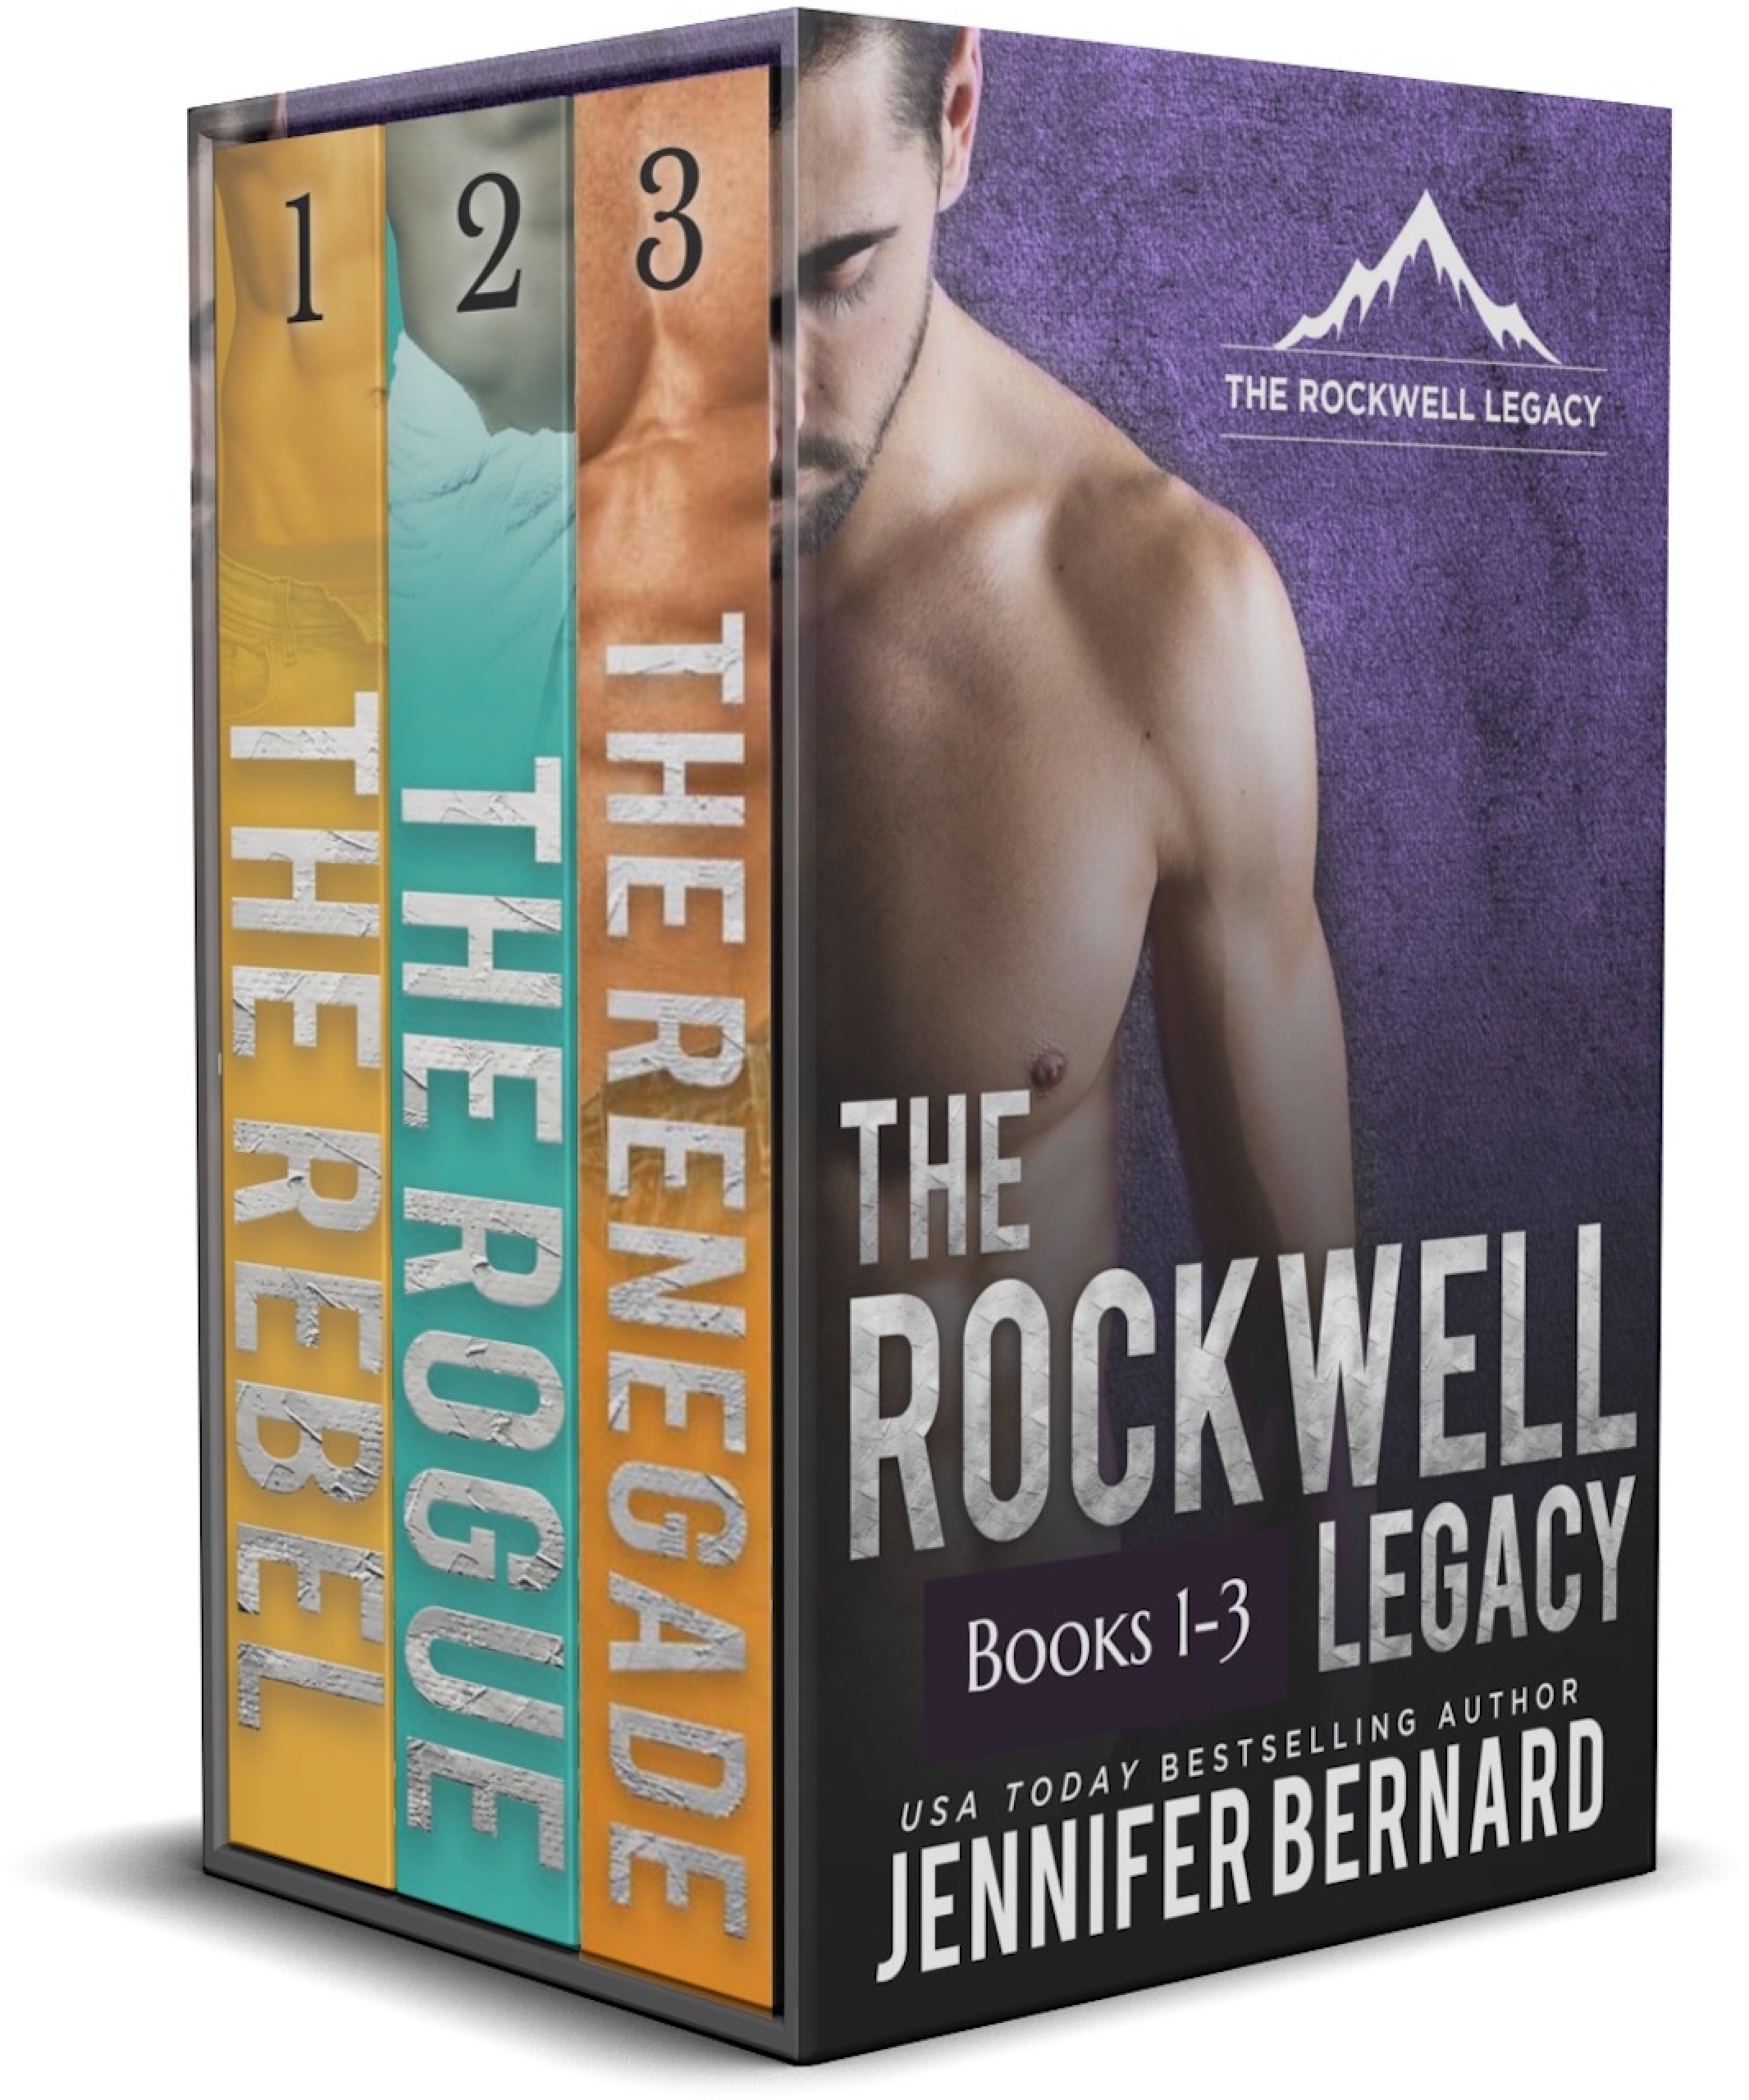 The Rockwell Legacy (Books 1-3)